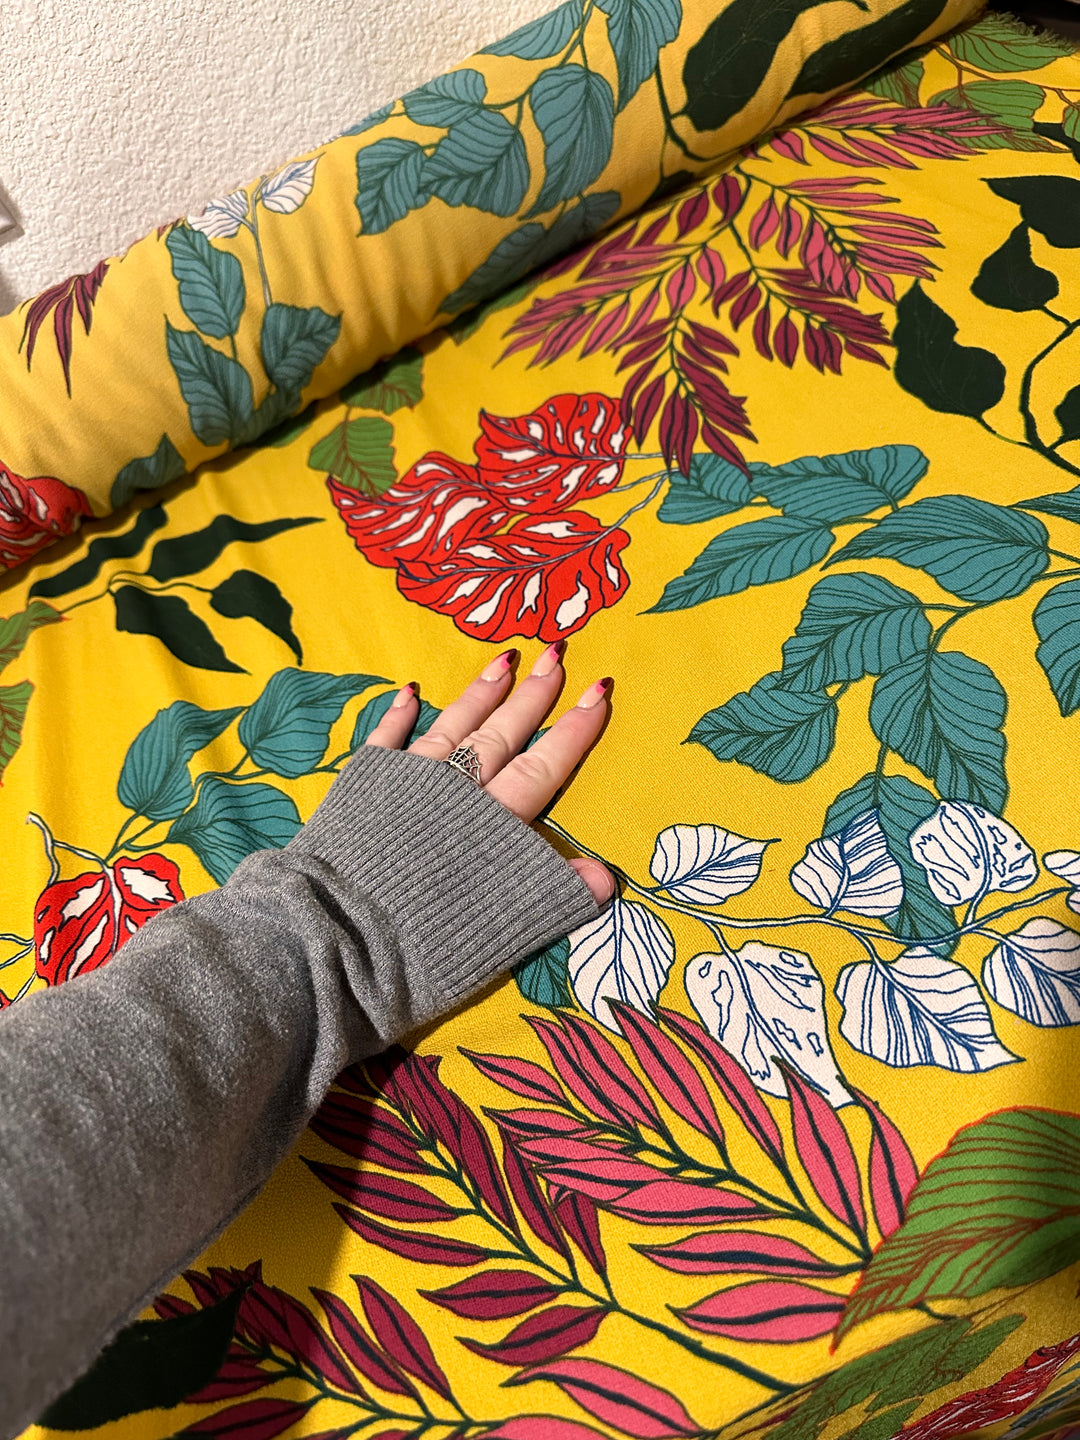 Large Yellow Tropical Print Rayon Fabric by the yard